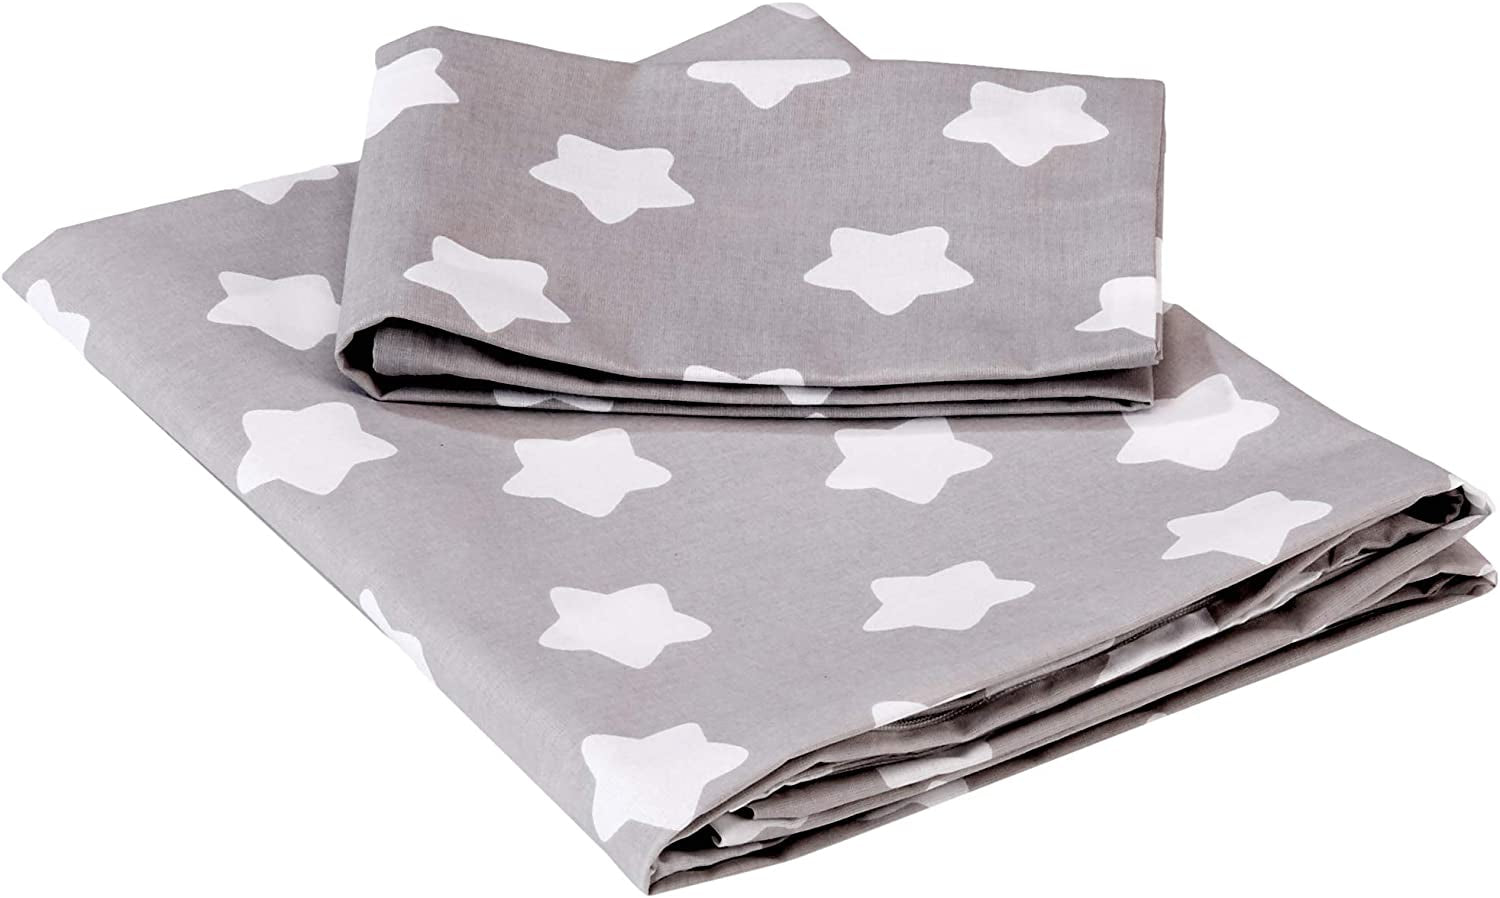 Baby Bedding Set Pillowcase + Duvet Cover 2PC to FIT Baby COT (Big White Stars on Grey Background)